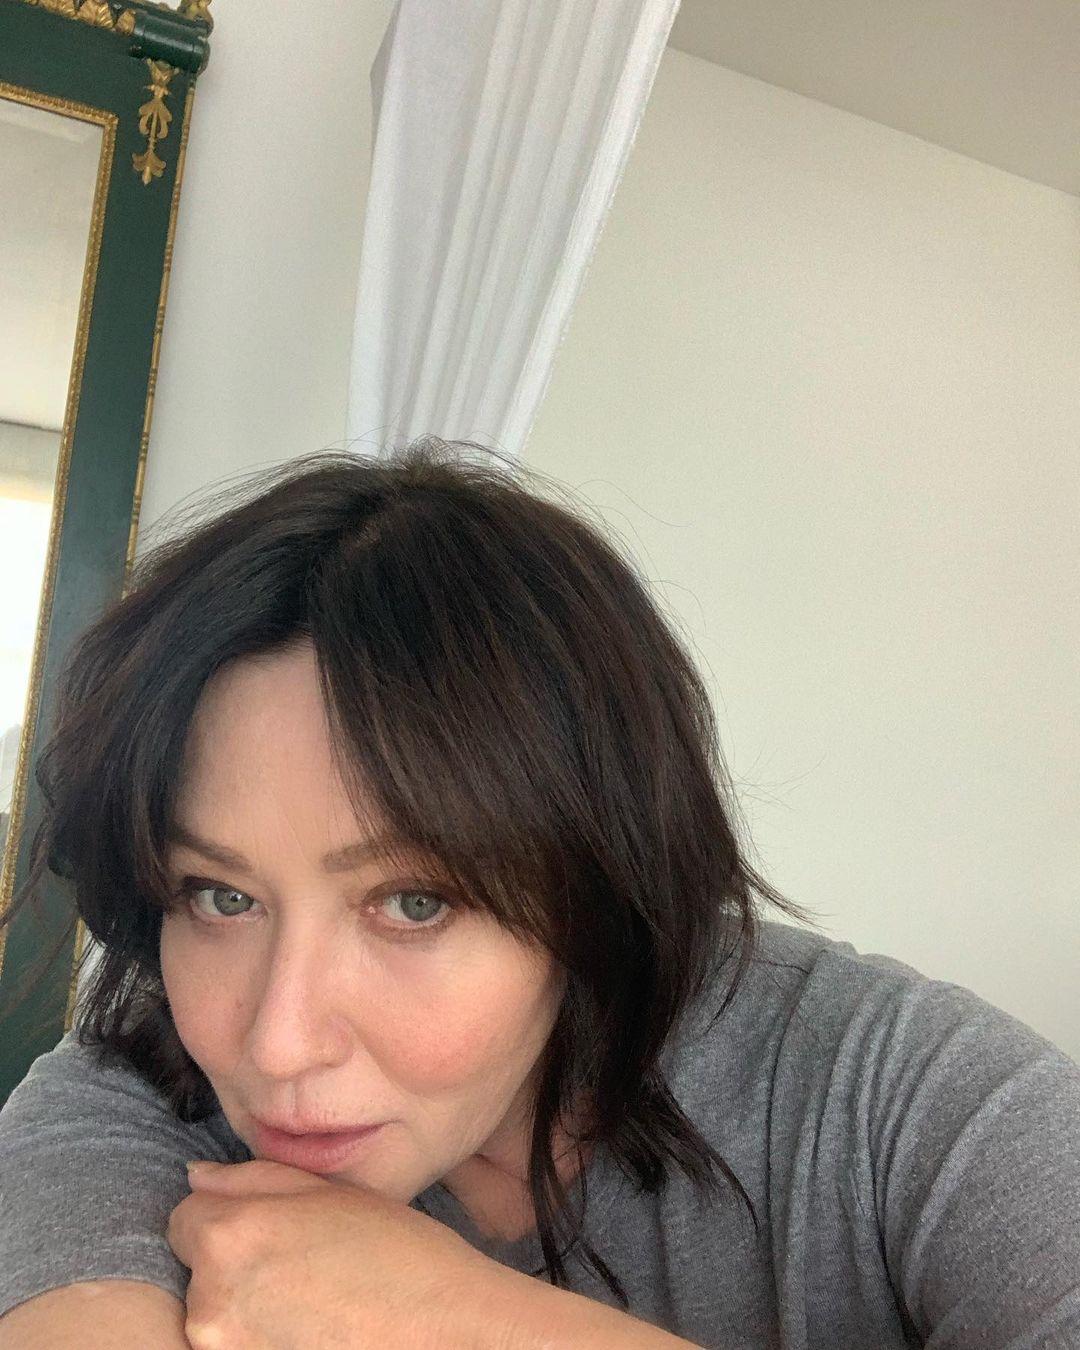 Shannen Doherty Gives Cancer Update Amid Multi-Million Insurance Case Win